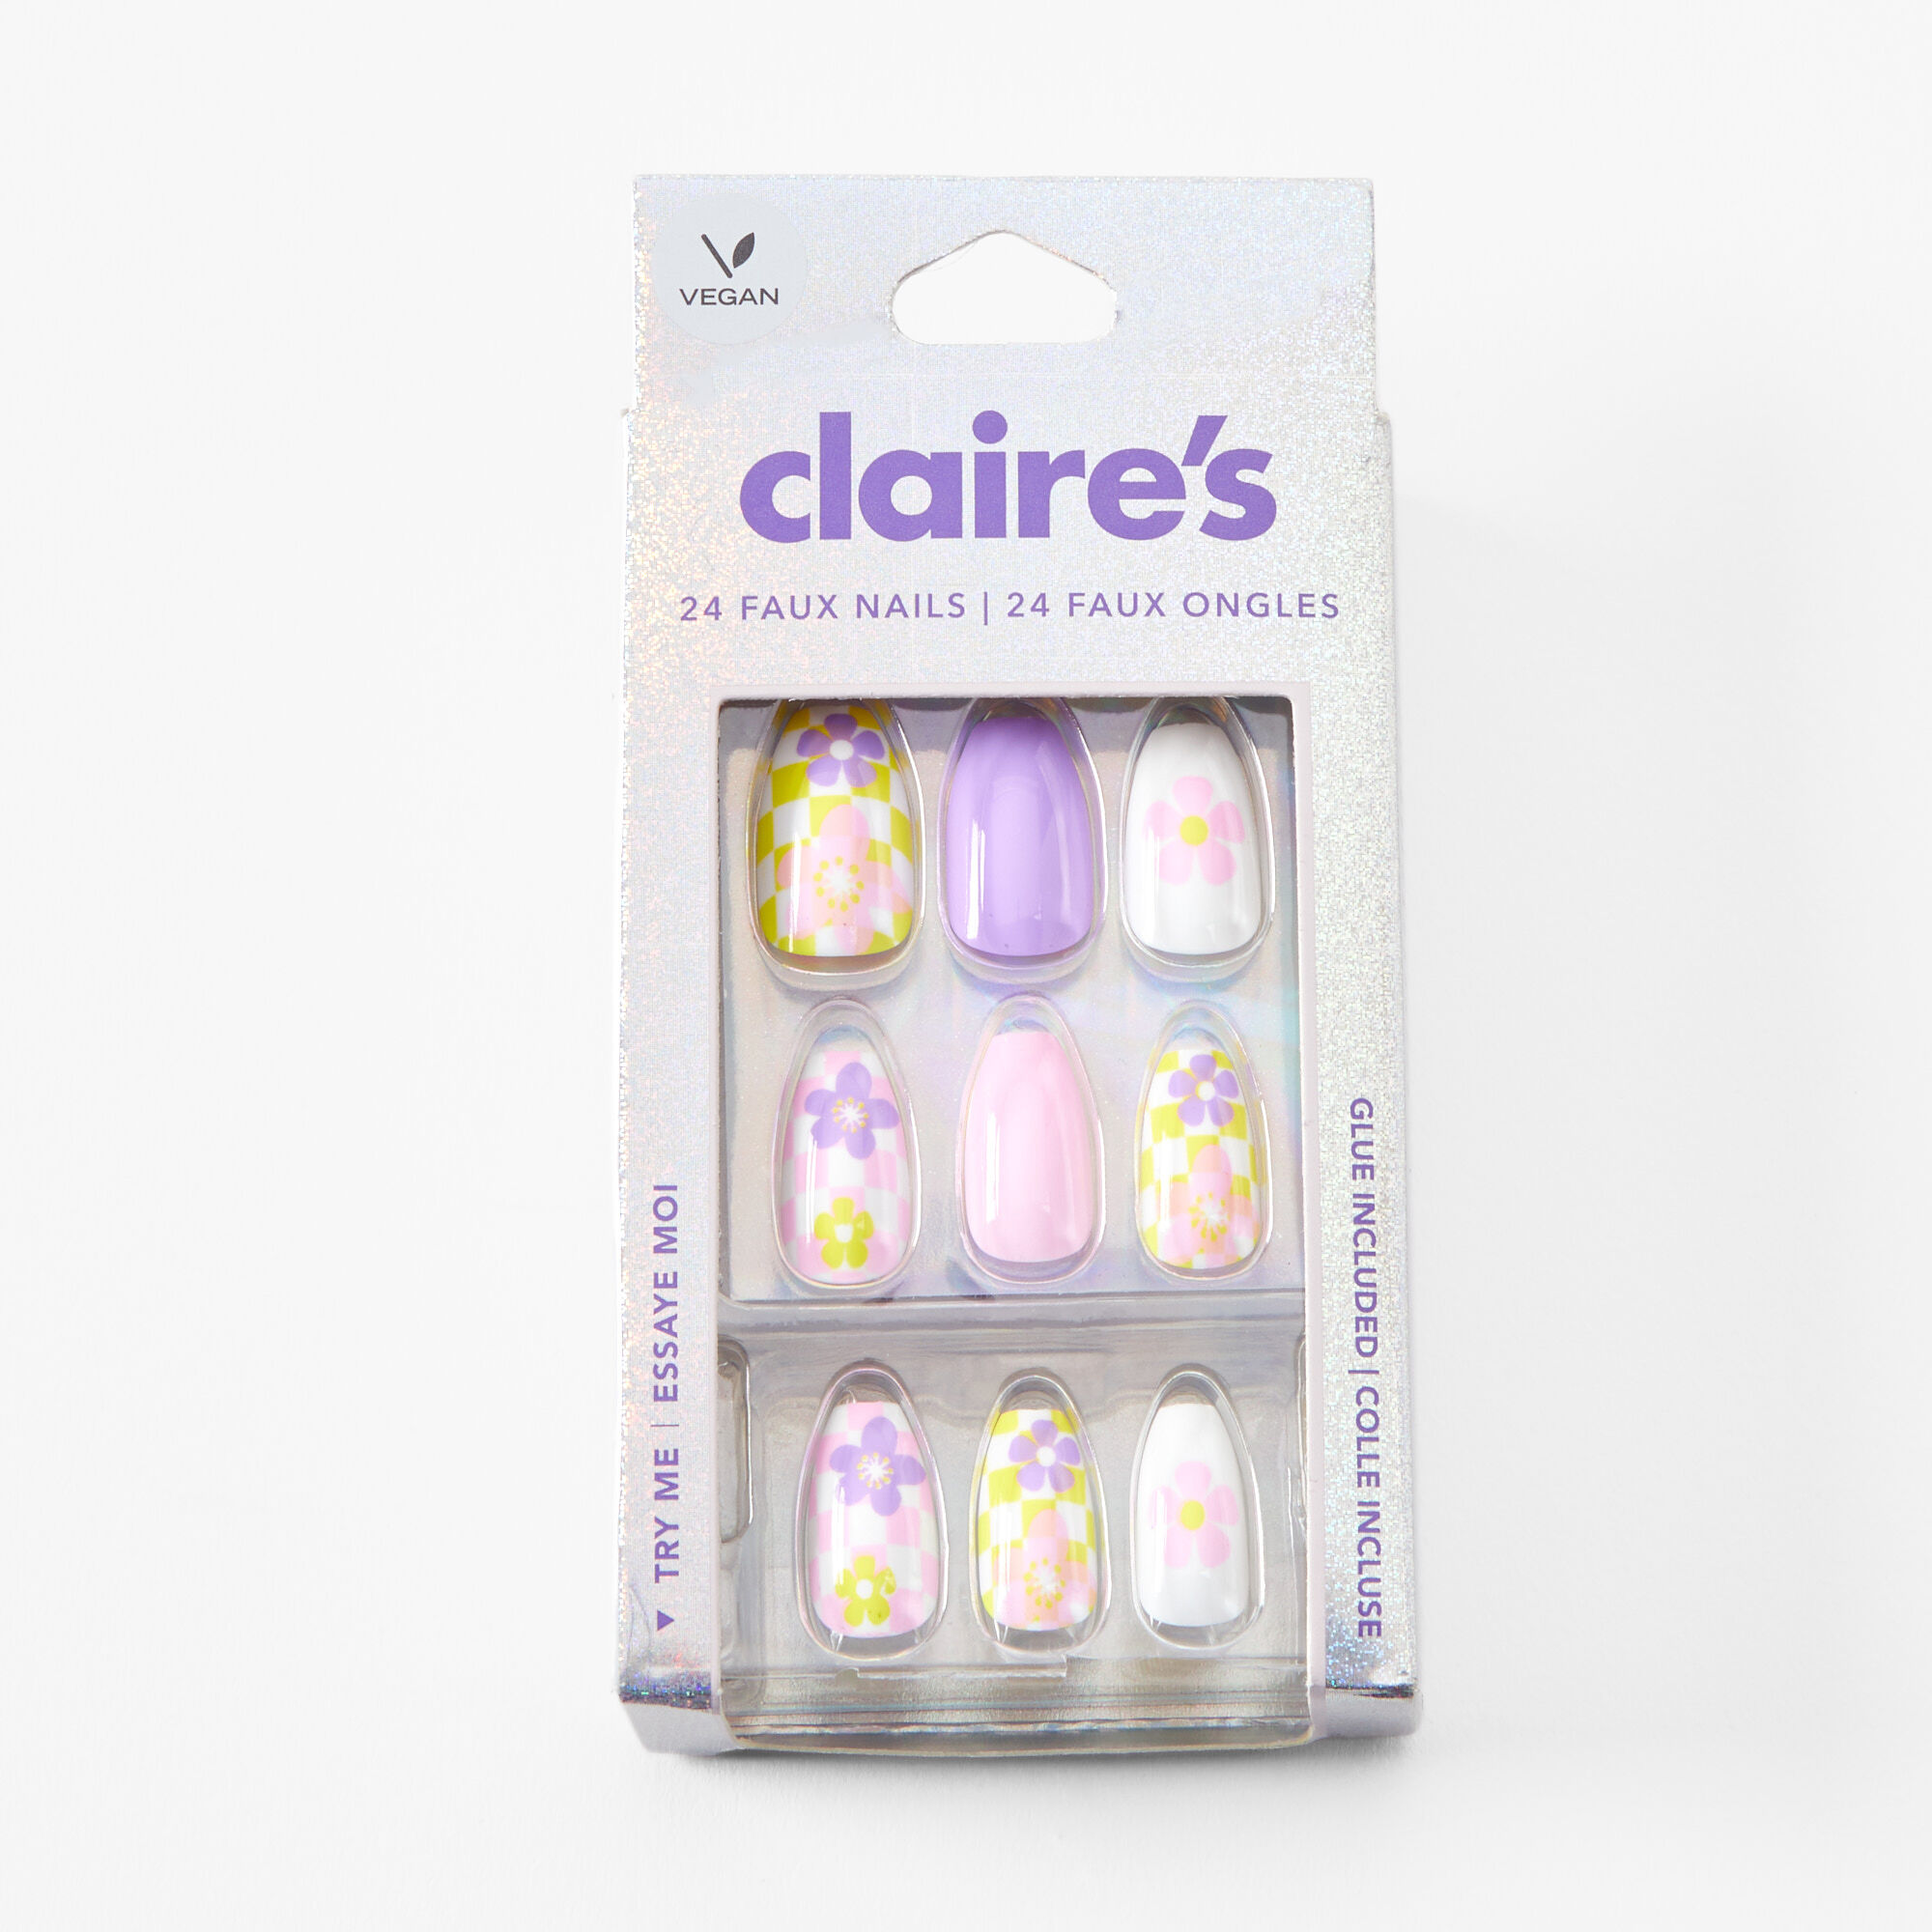 Pink Marble French Tip Squareletto Press On Vegan Faux Nail Set - 24 Pack |  Claire's